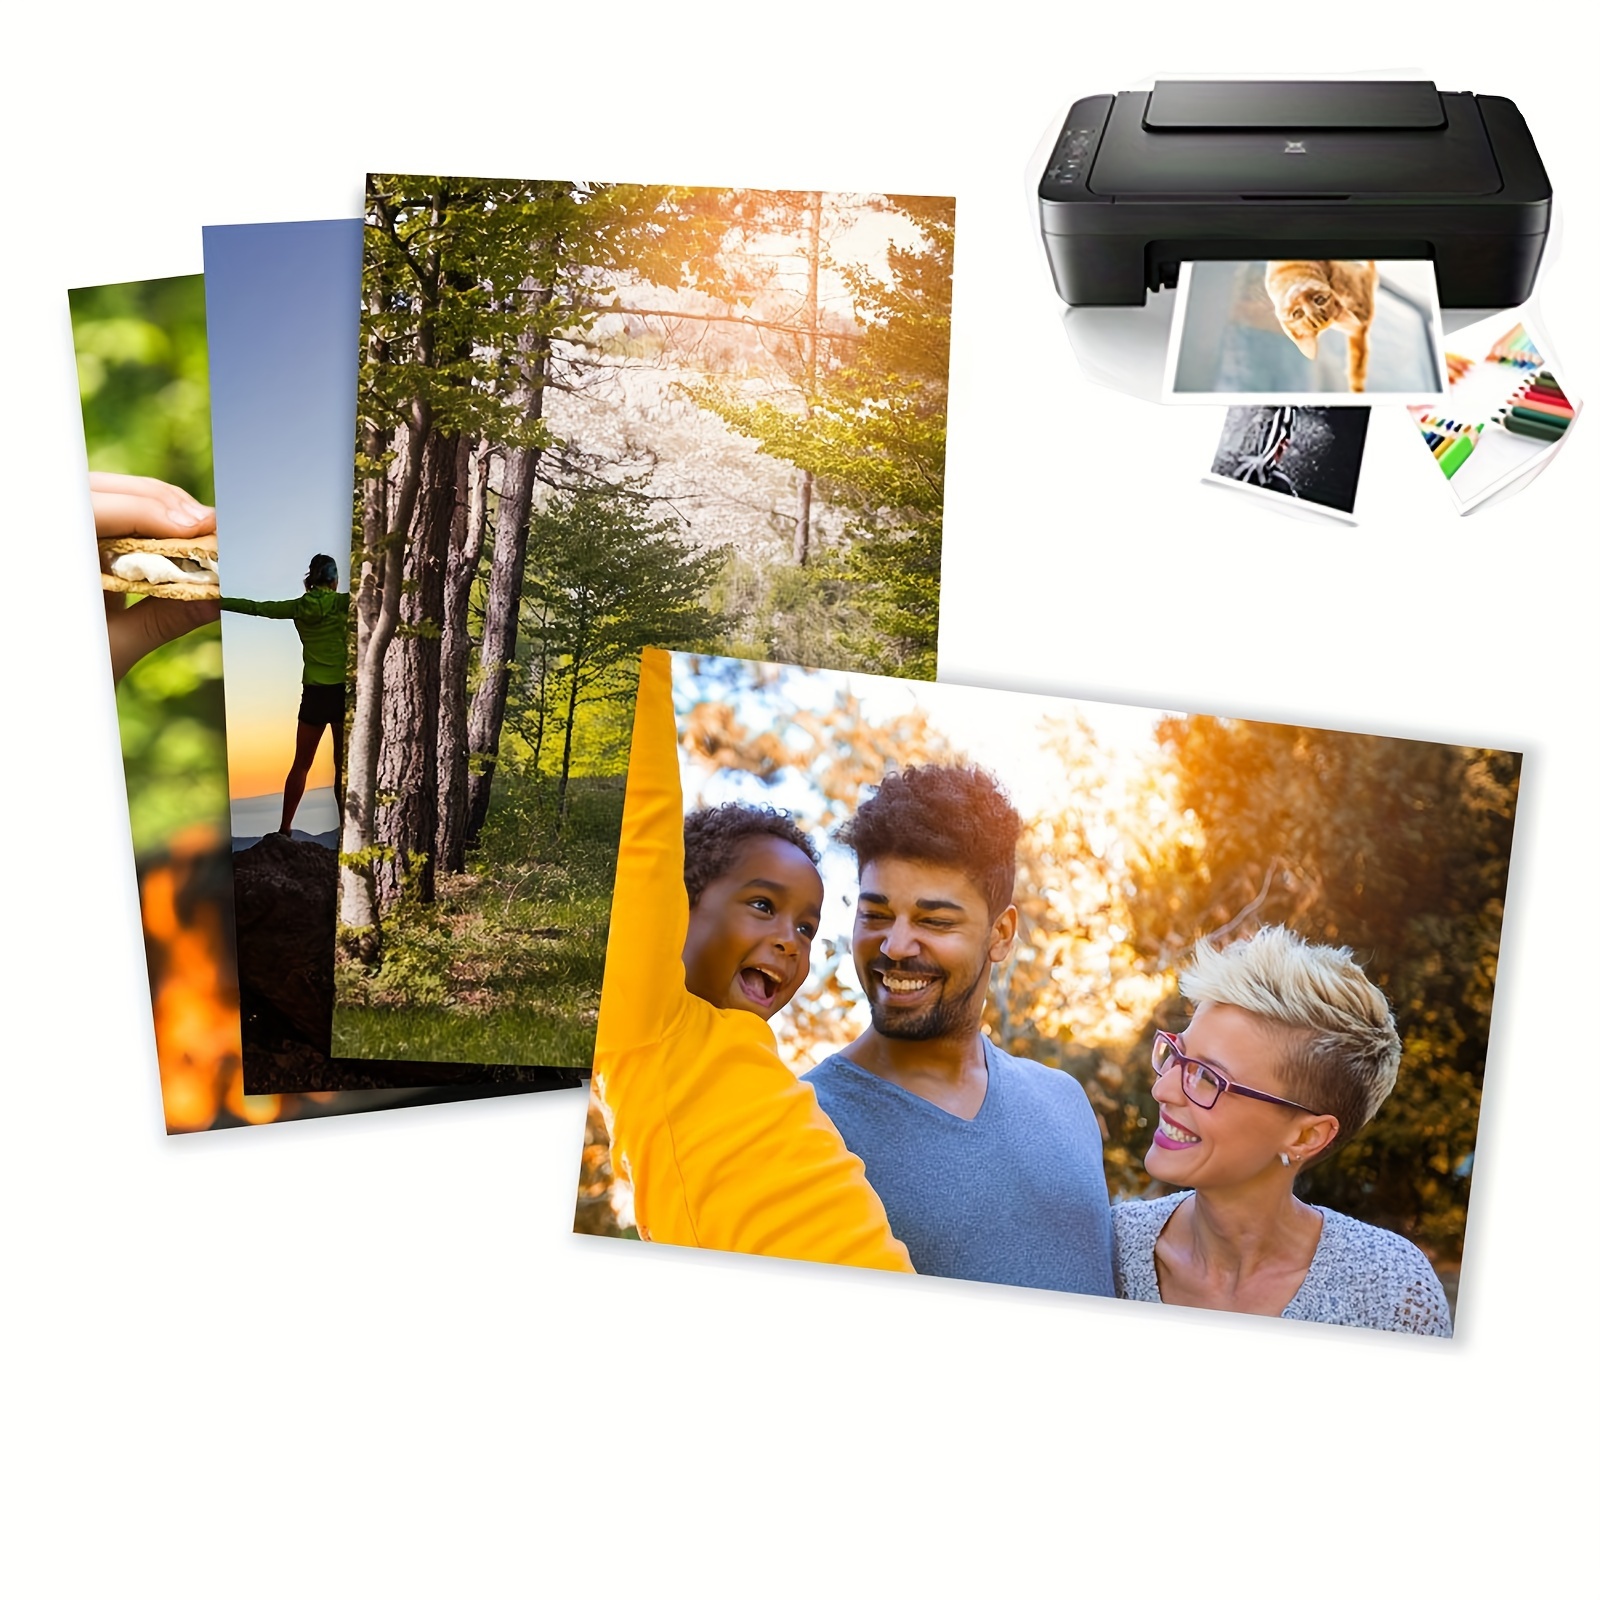 Printable Magnetic Sheets 8.5x11 Matte Magnet Photo Paper Cutable for  Inkjet + Laser Printers, Cricut, 5 Sheets, DIY Signs, Crafts, Photo Ablums